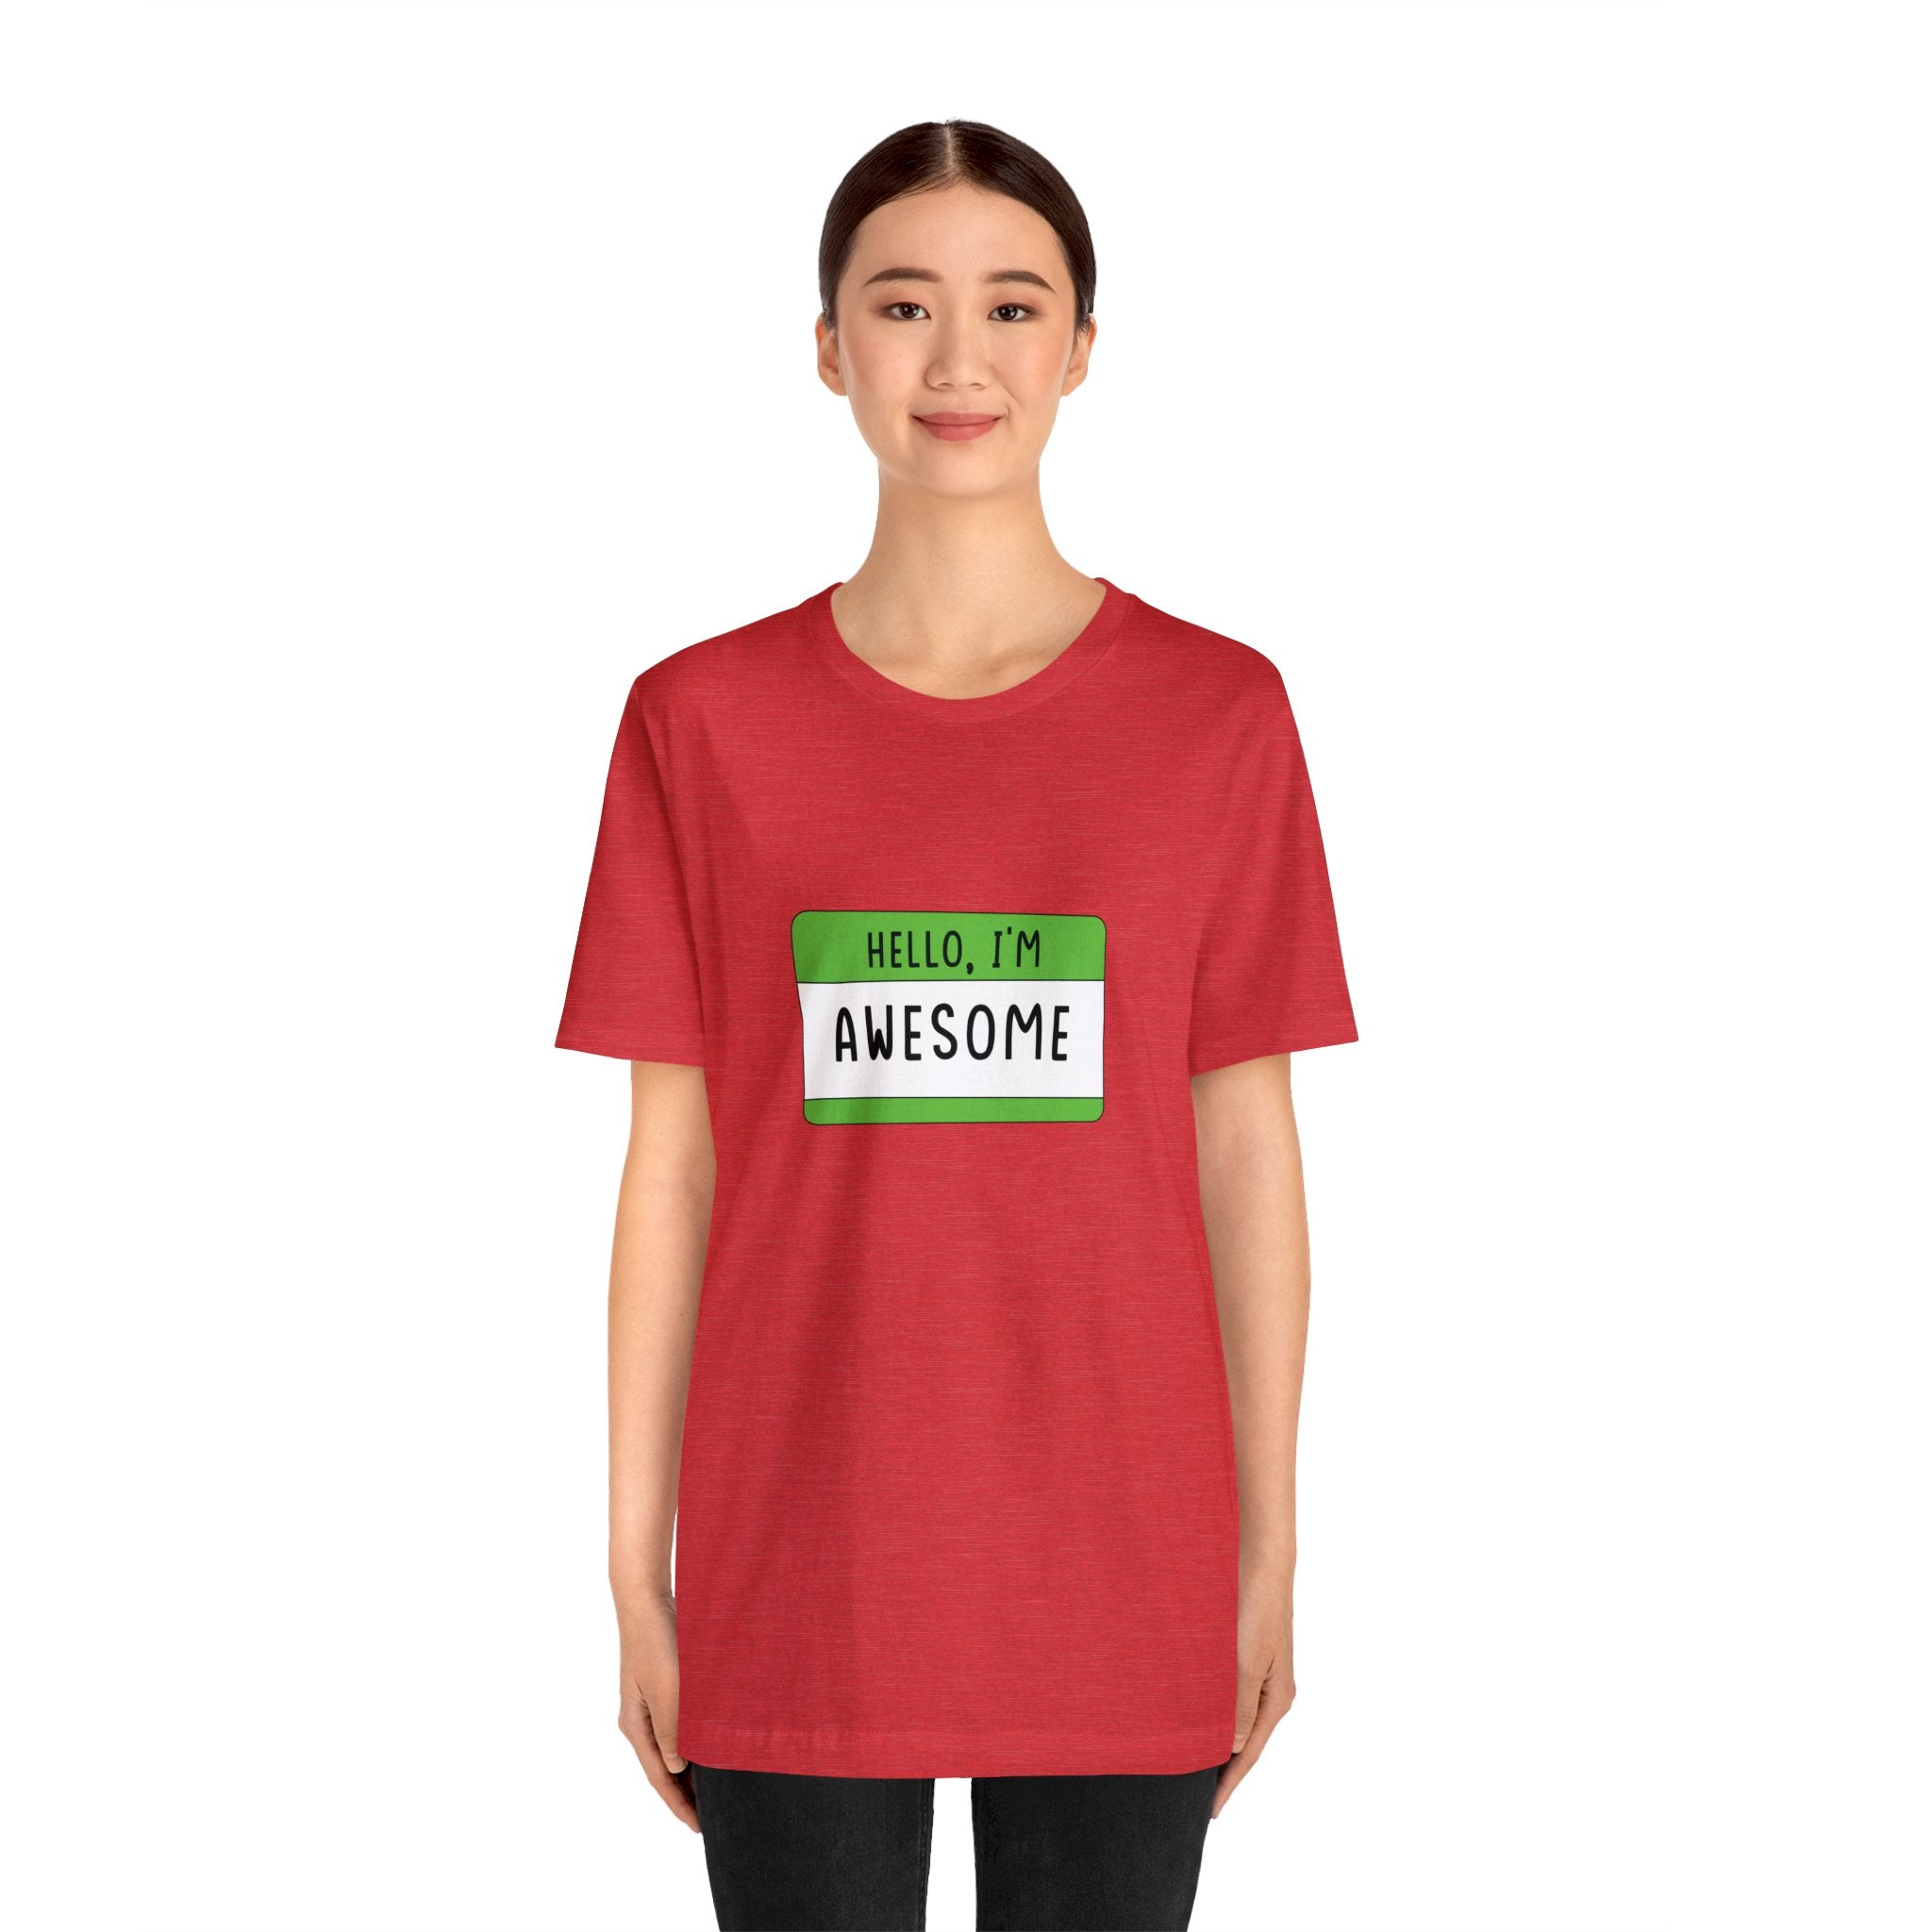 A young woman in a red Hello, I'm Awesome T-shirt with a green "hello, i'm awesome" name tag stands smiling.